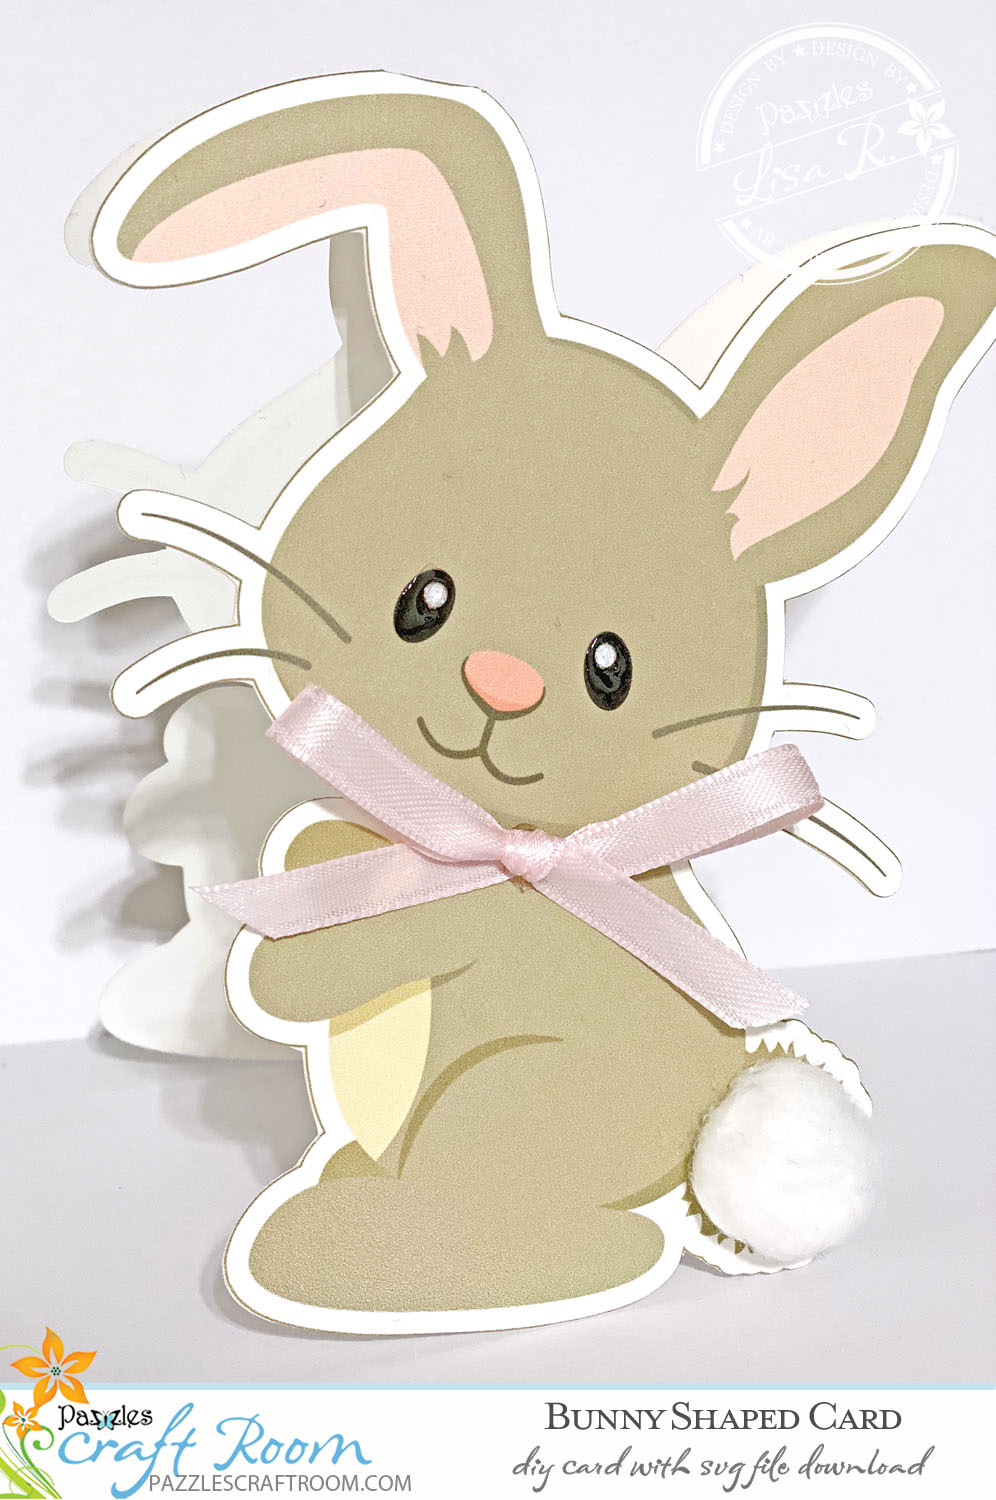 Pazzles DIY Bunny Card with instant SVG download. Compatible with all major electronic cutters including Pazzles Inspiration, Cricut, and Silhouette Cameo. Design by Lisa Reyna.